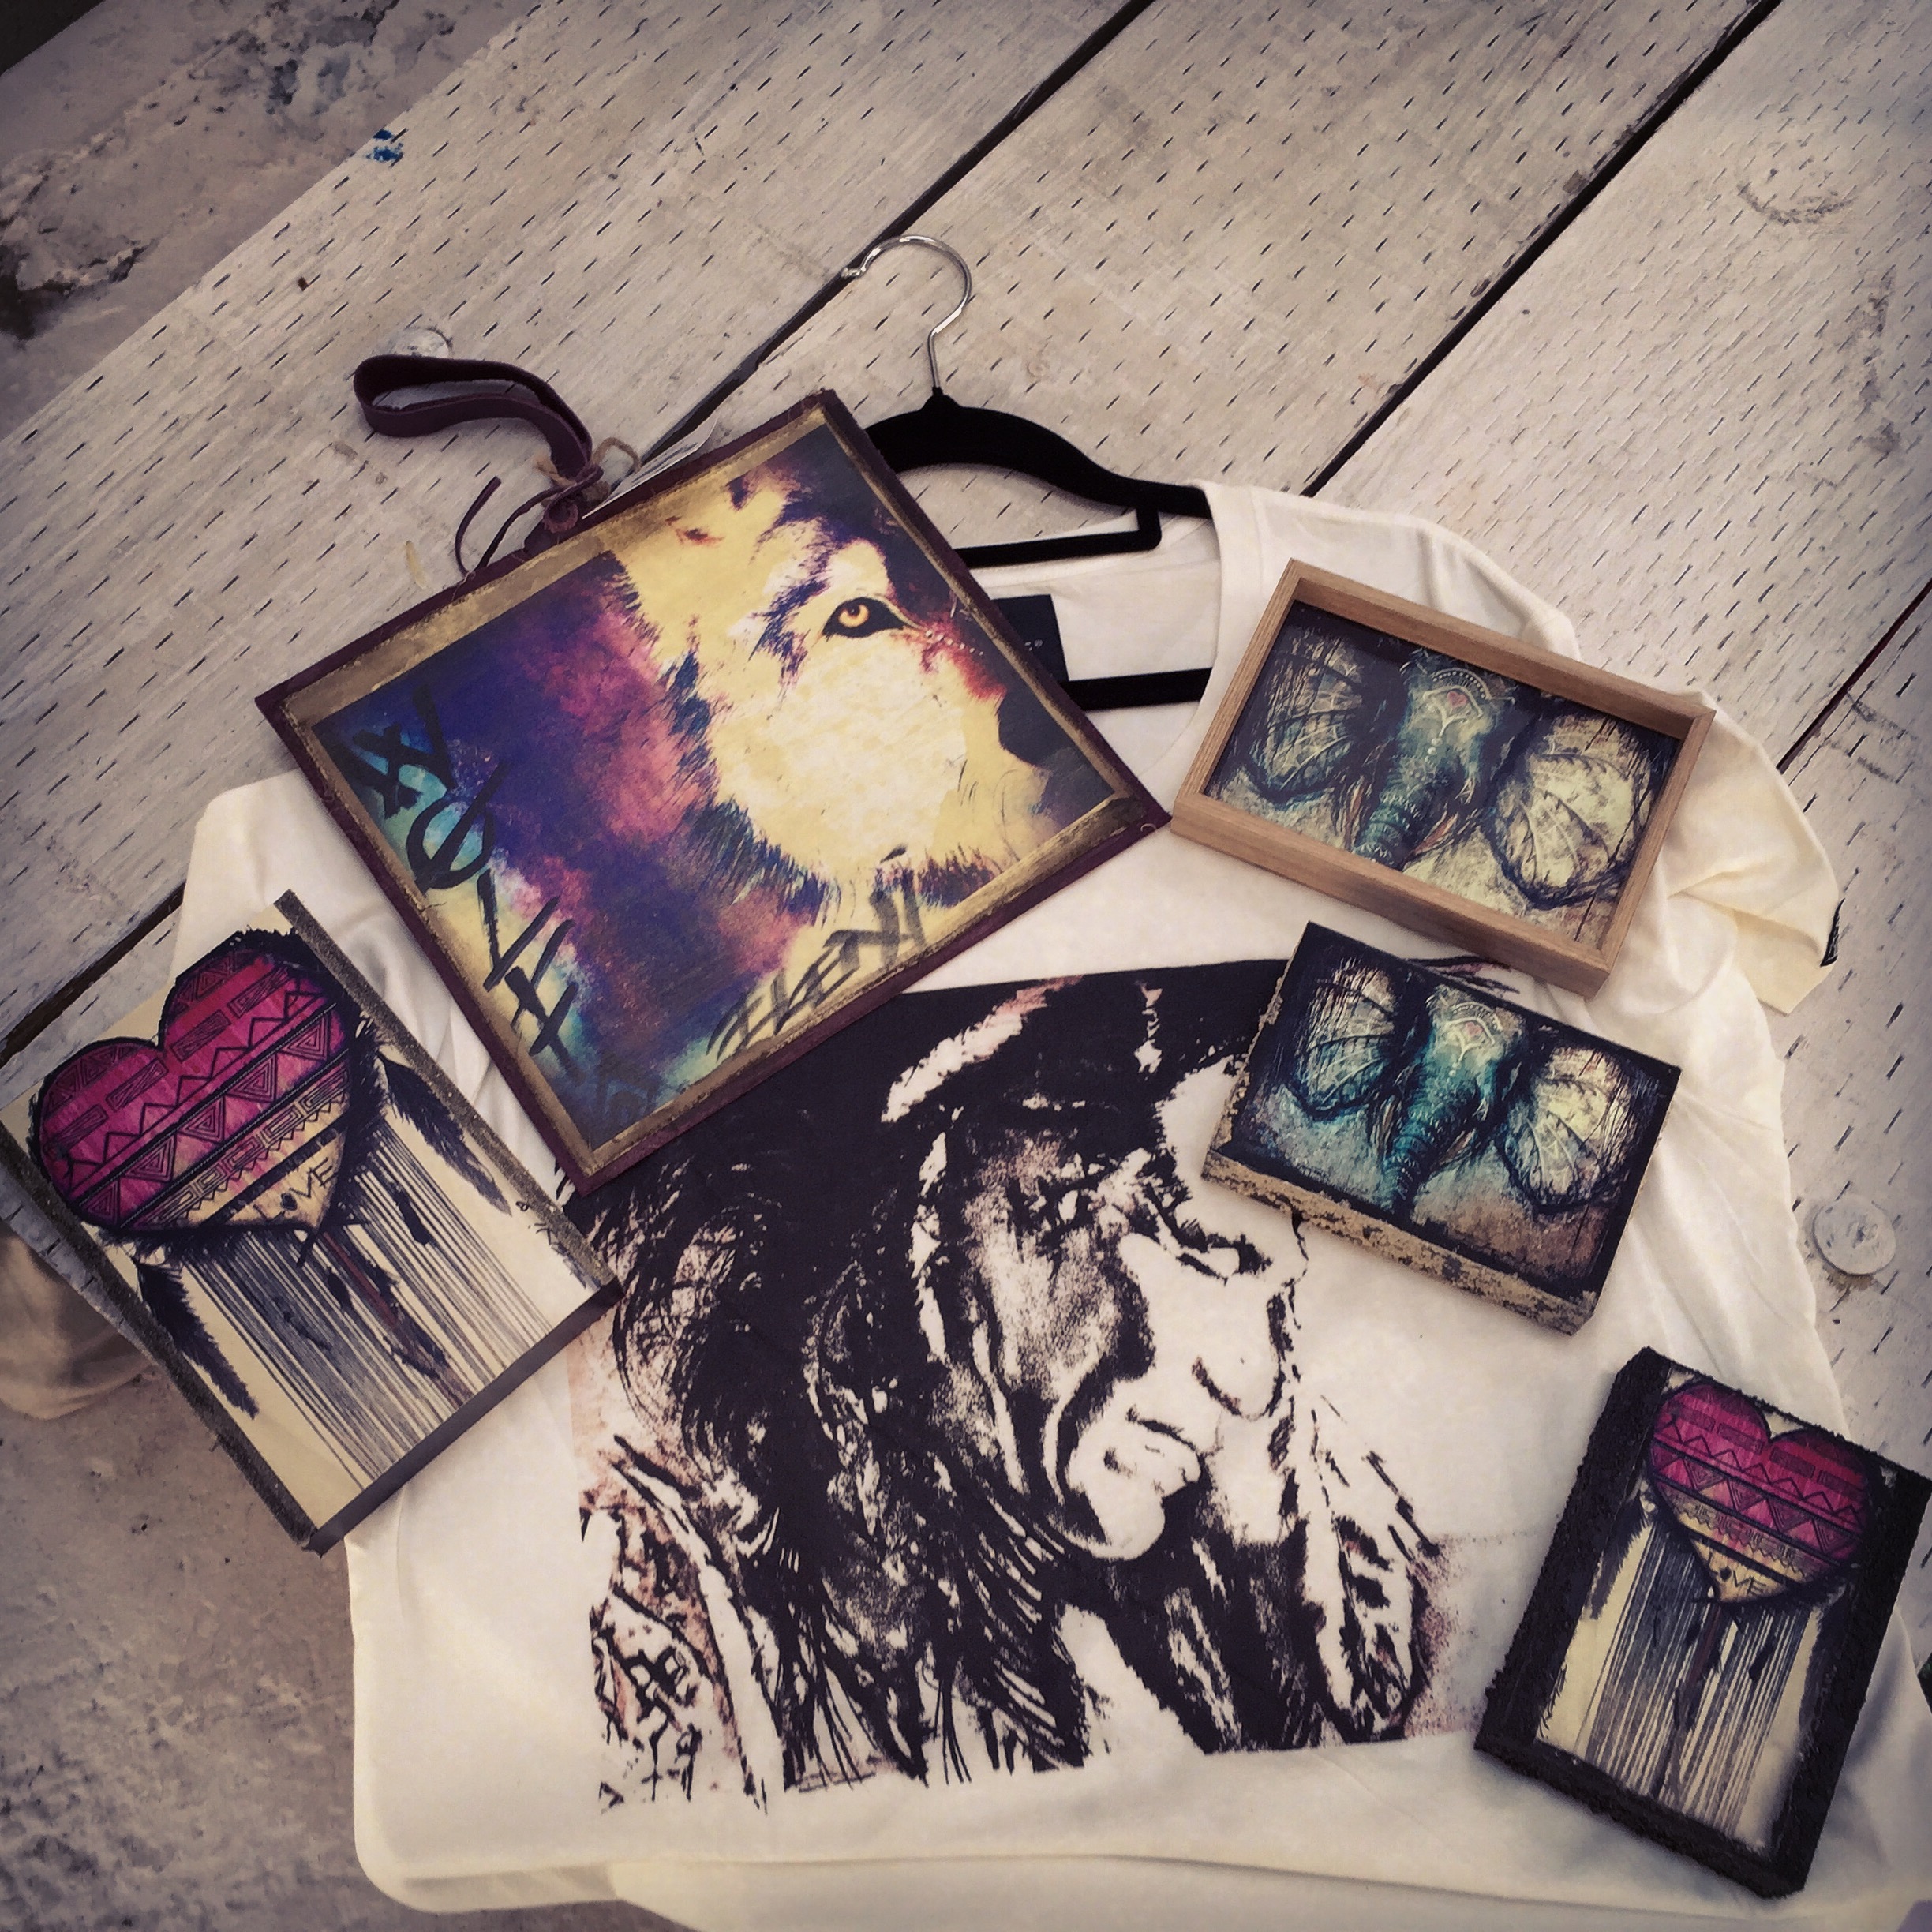 Art work for sale... leather clutch bags, t shirts, picture frames 